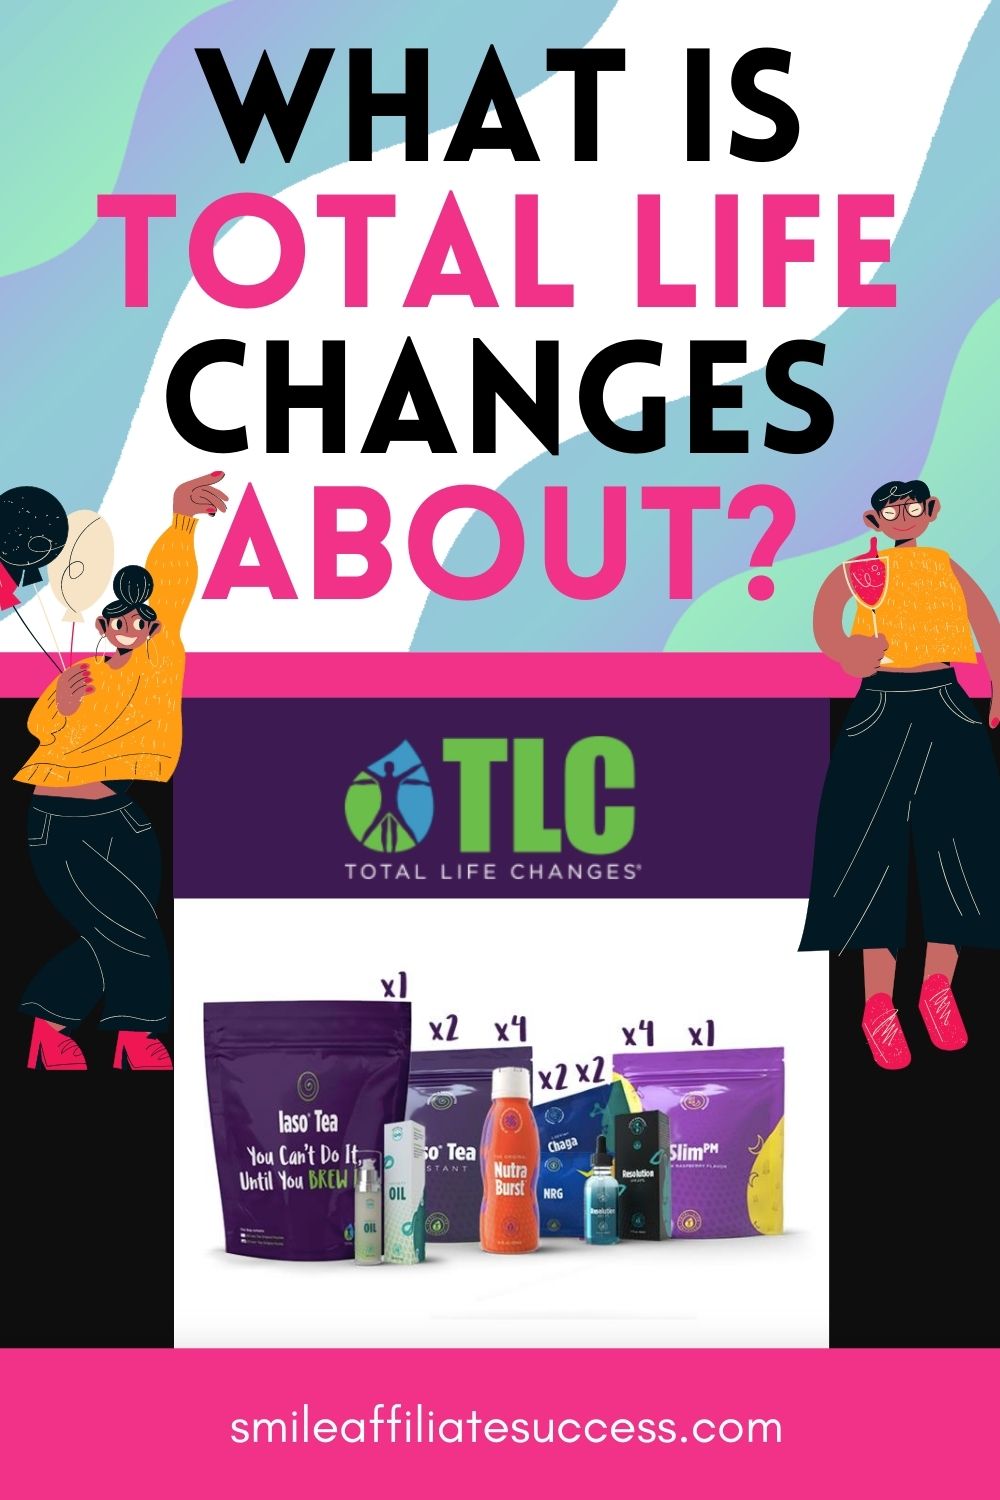 What Is Total Life Changes About?